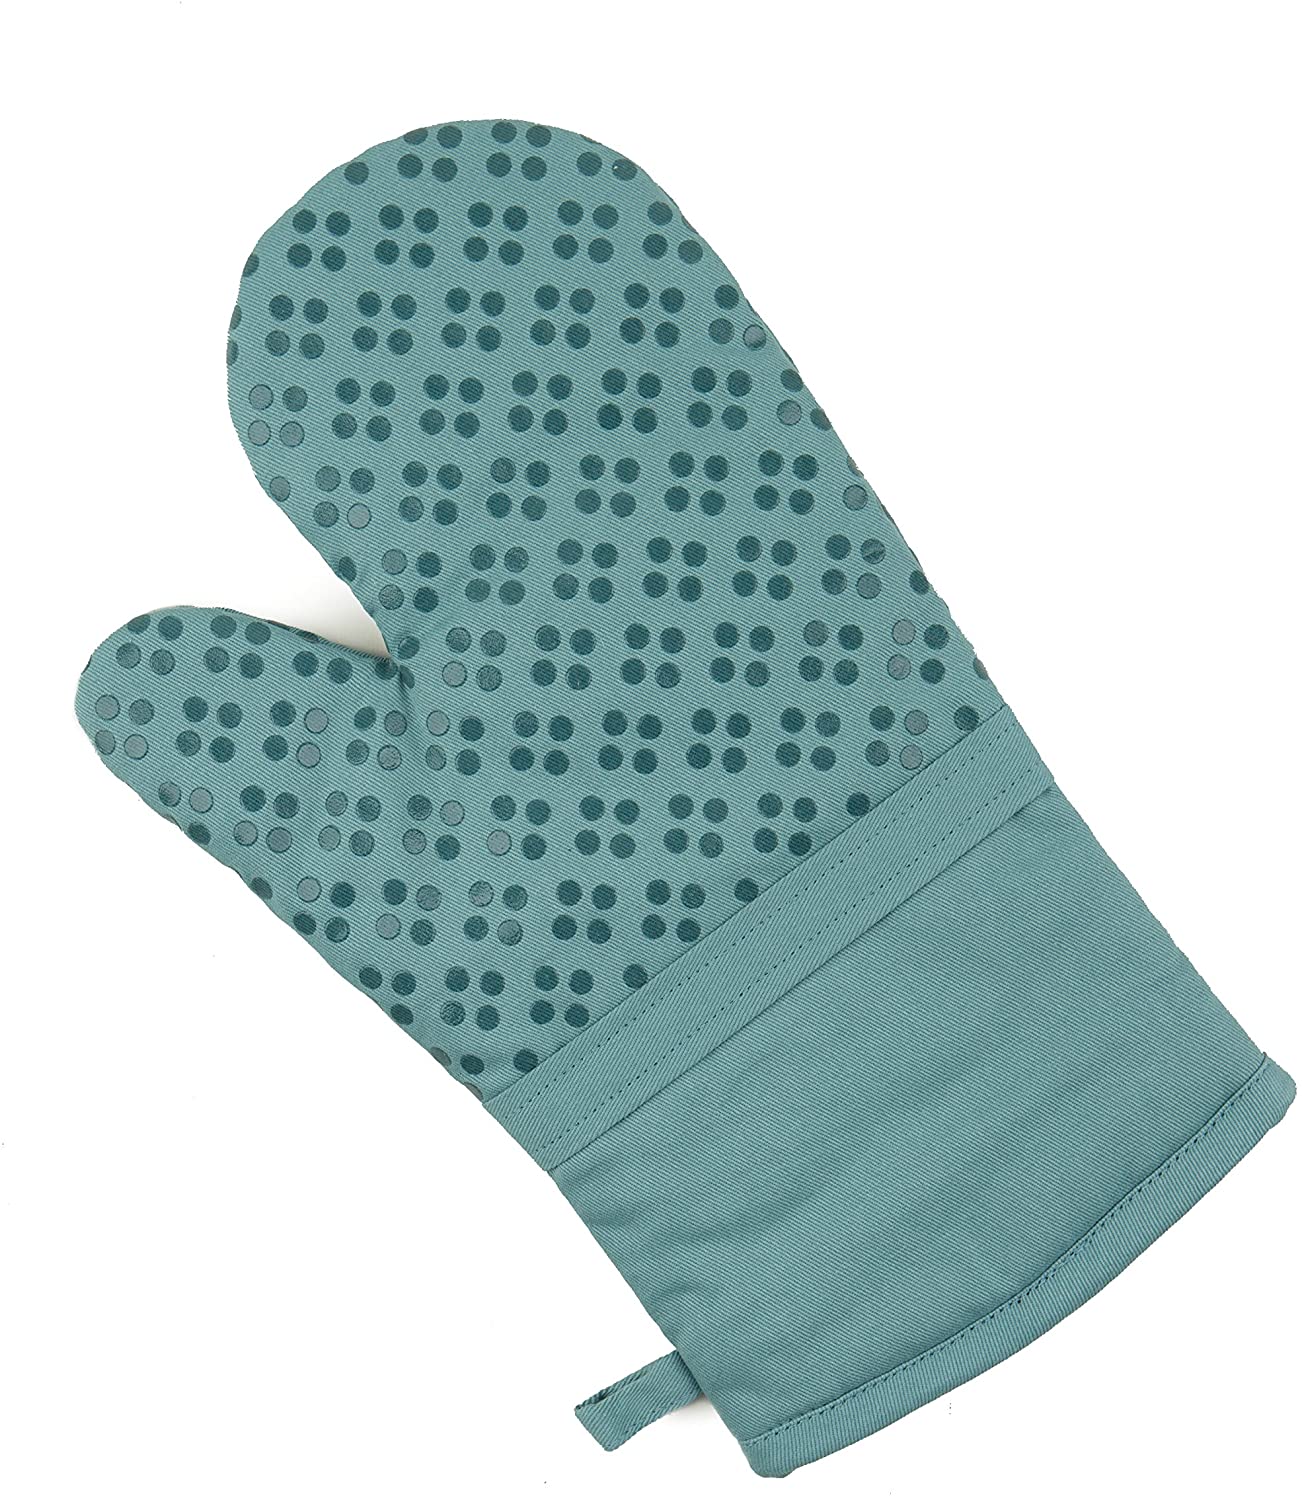  Oven Mitts and Pot Holders with Kitchen Towel